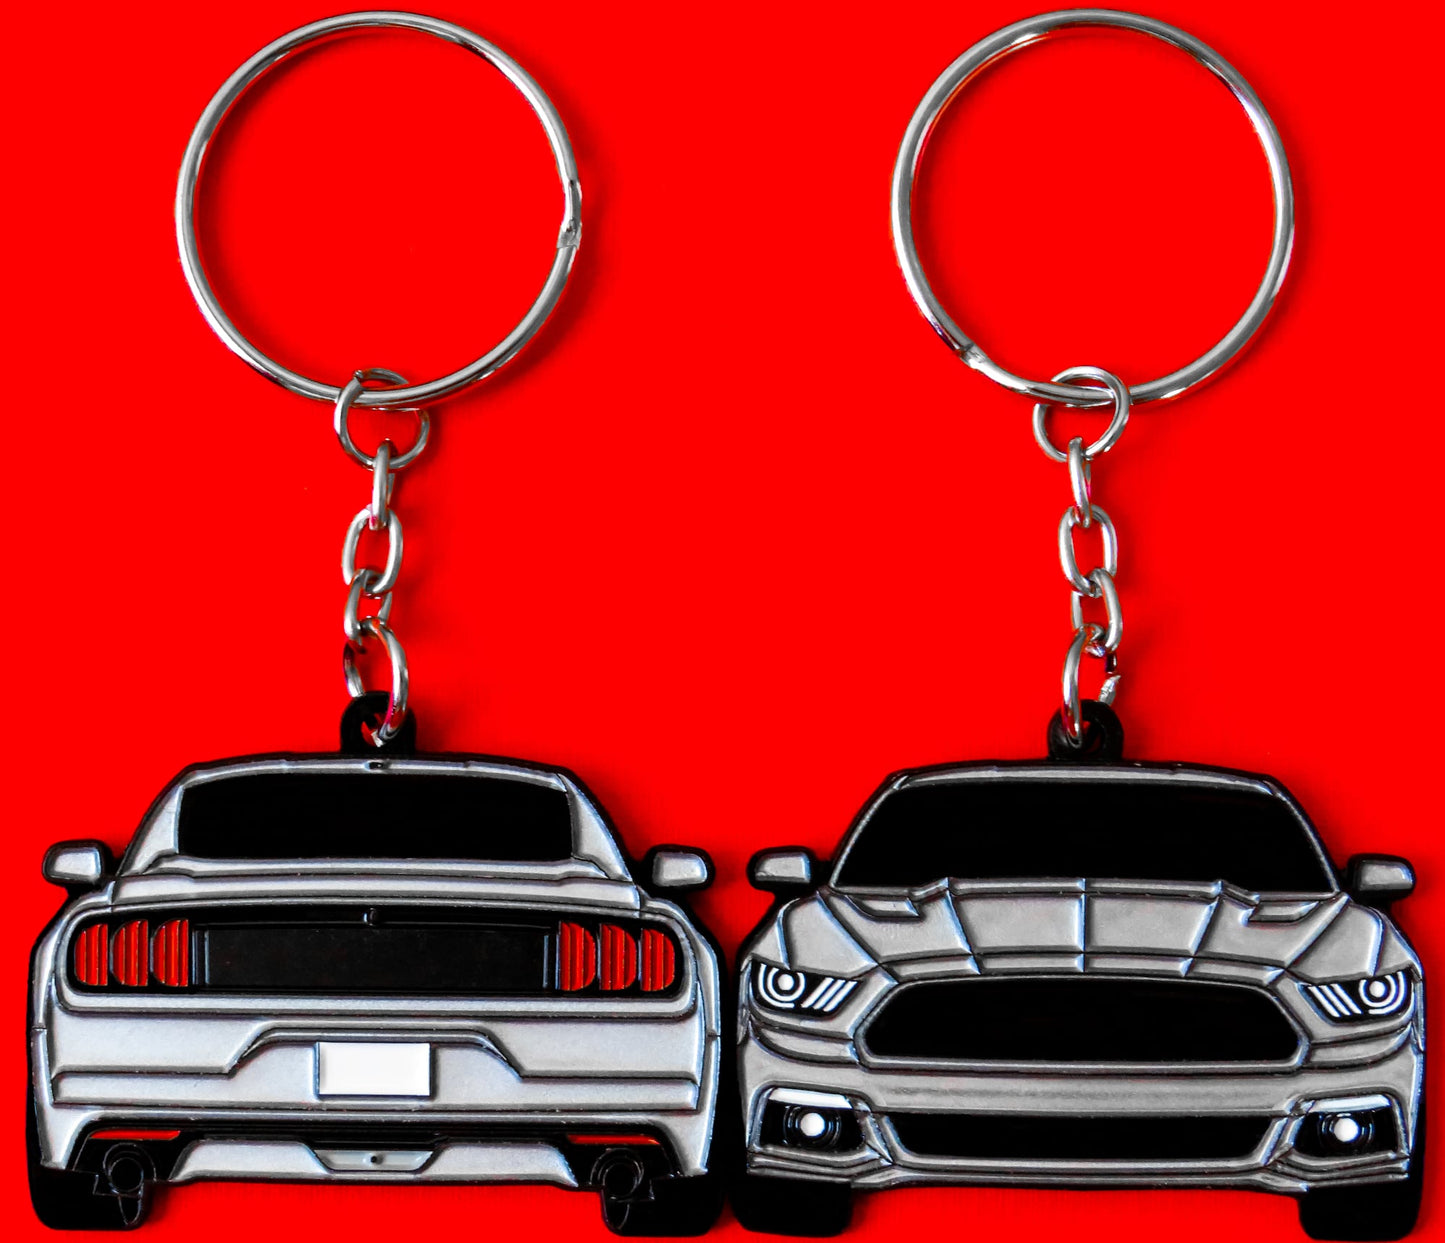 Keychain that fits on a key fob cover for Ford Mustang Silver sixth generation S550 Stang lanyard for car guys and enthusiasts, girlfriend, boyfriend, father, dad, mother, mom, him, her, and more. Apparel and parts 2015 2016 2017 2018 2019 2020 2021 2022 Ecoboost turbo cyclone 5.0 2.3